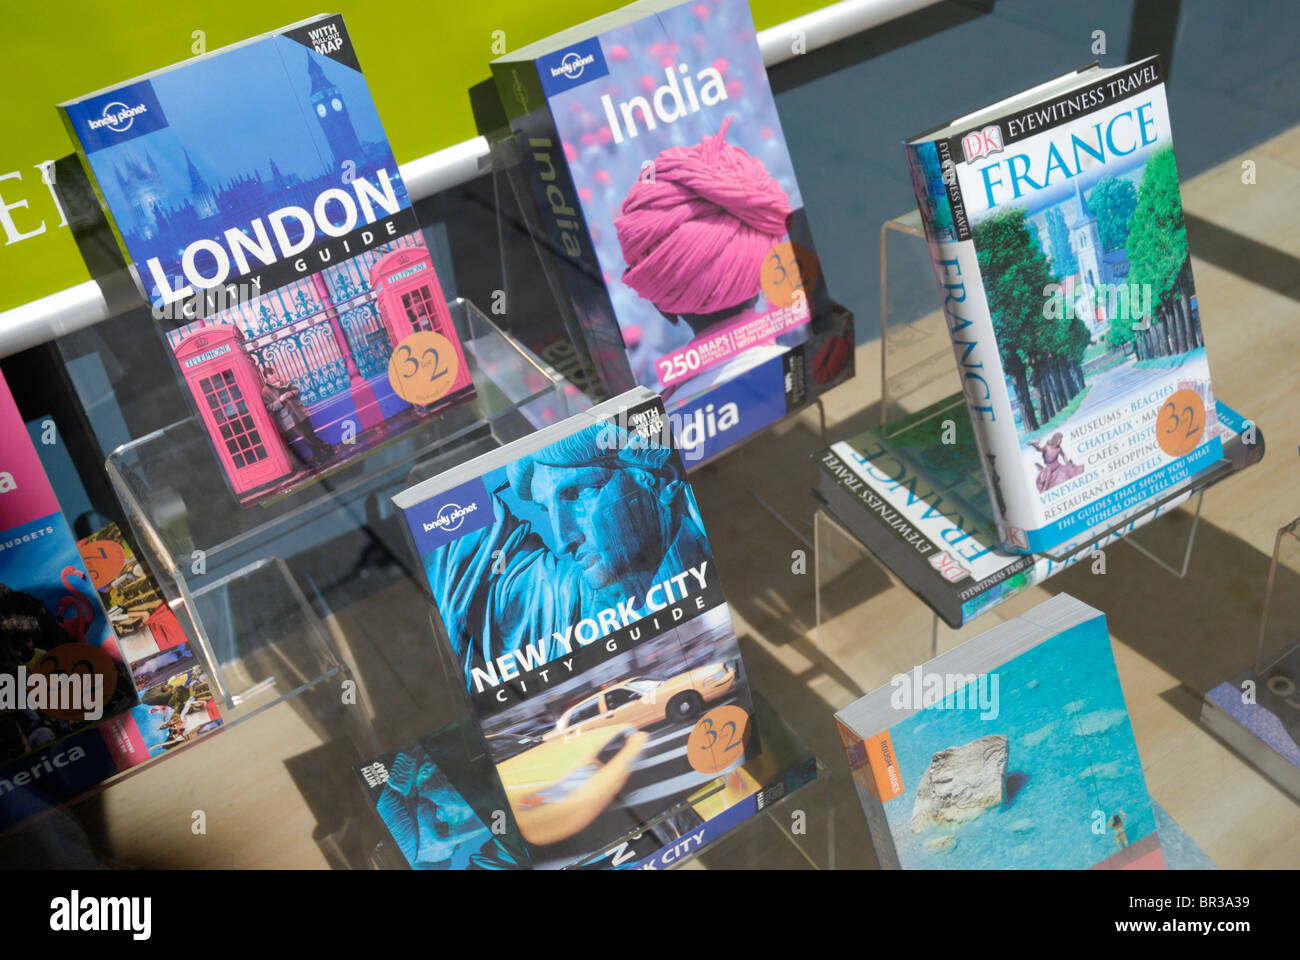 Travel guides on display in a shop window Stock Photo